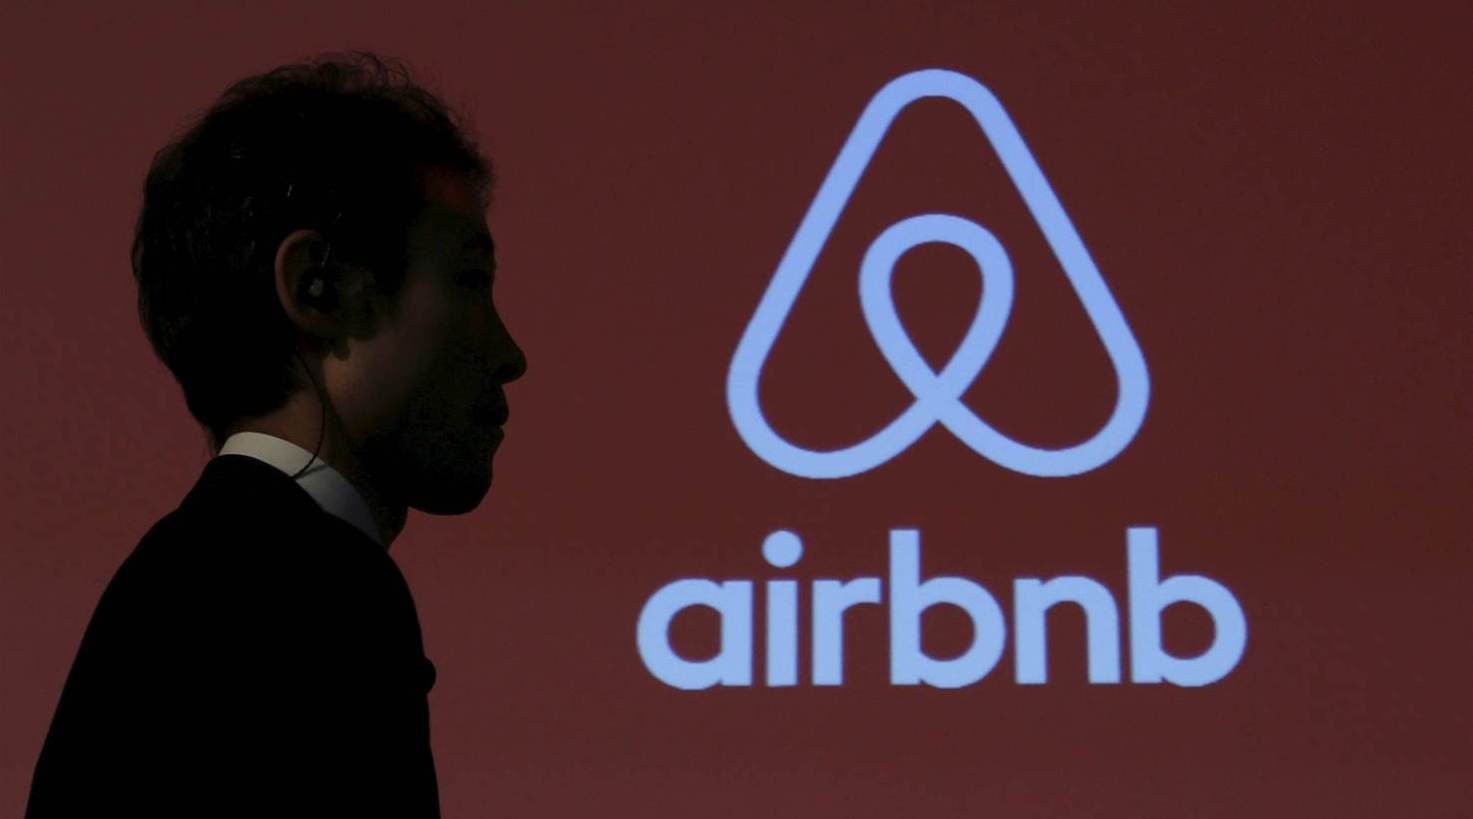 Airbnb said to confidentially file for IPO in August